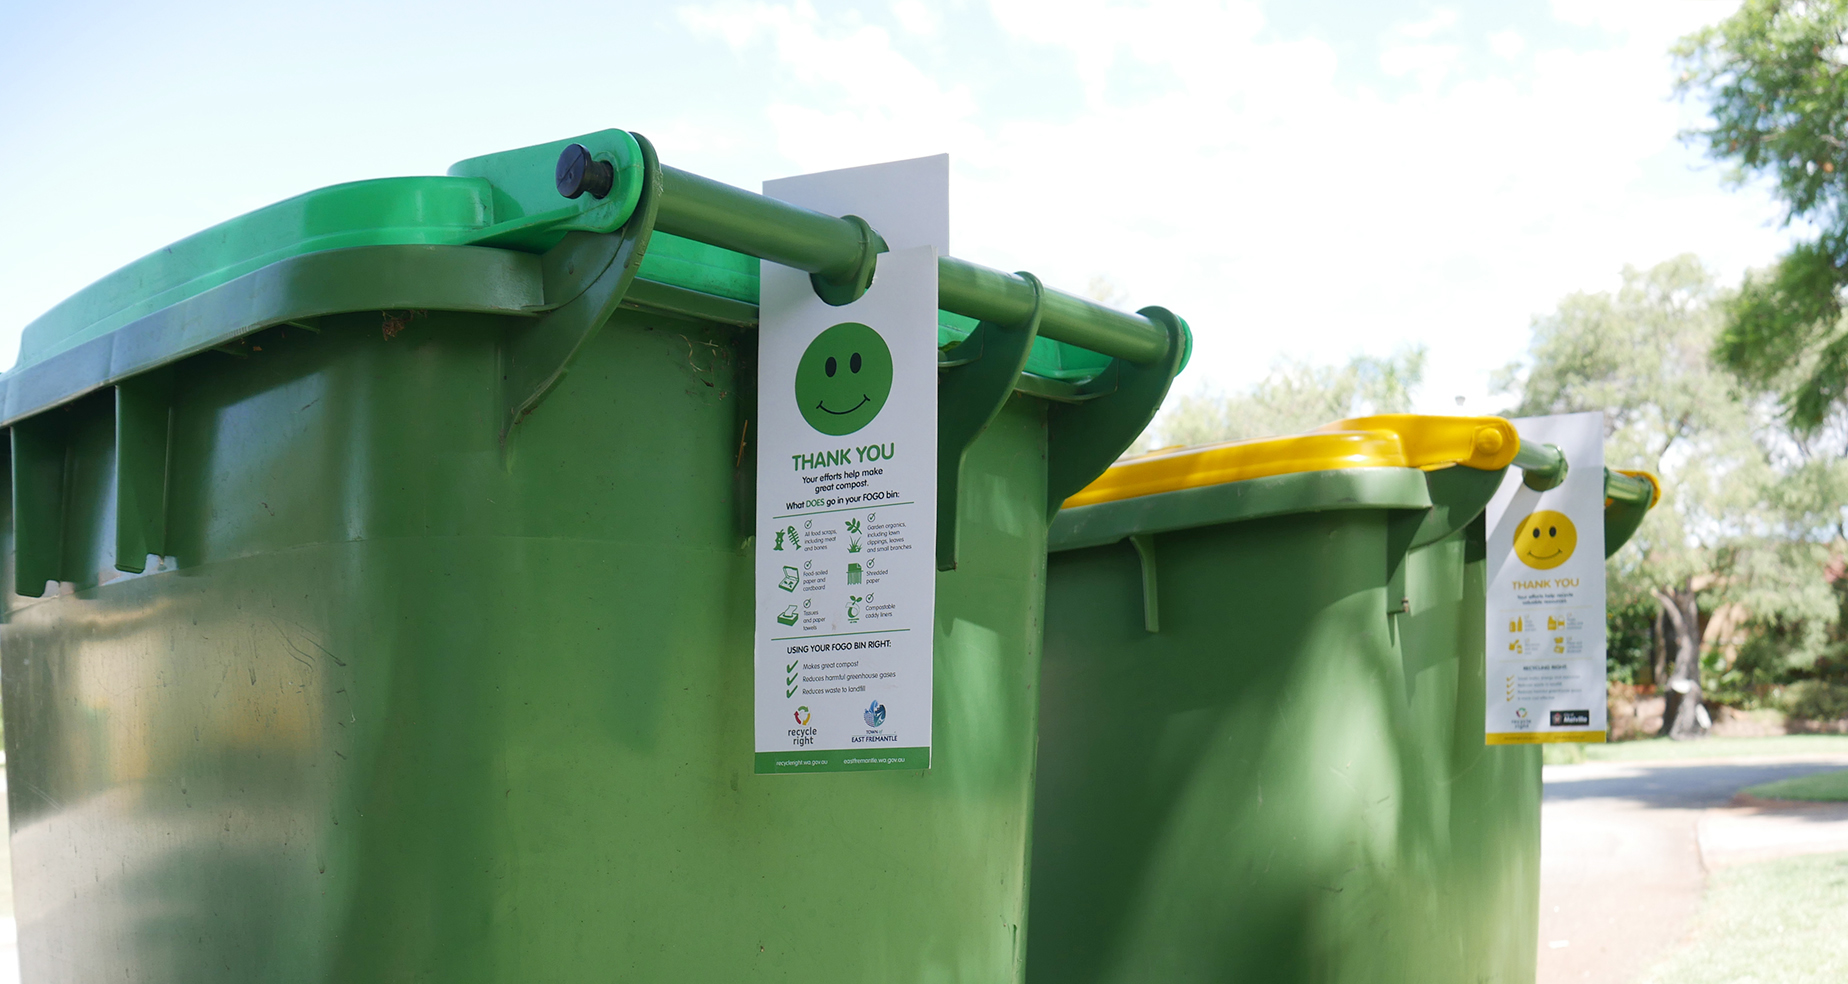 Bin tagging encourages residents to ‘recycle right’